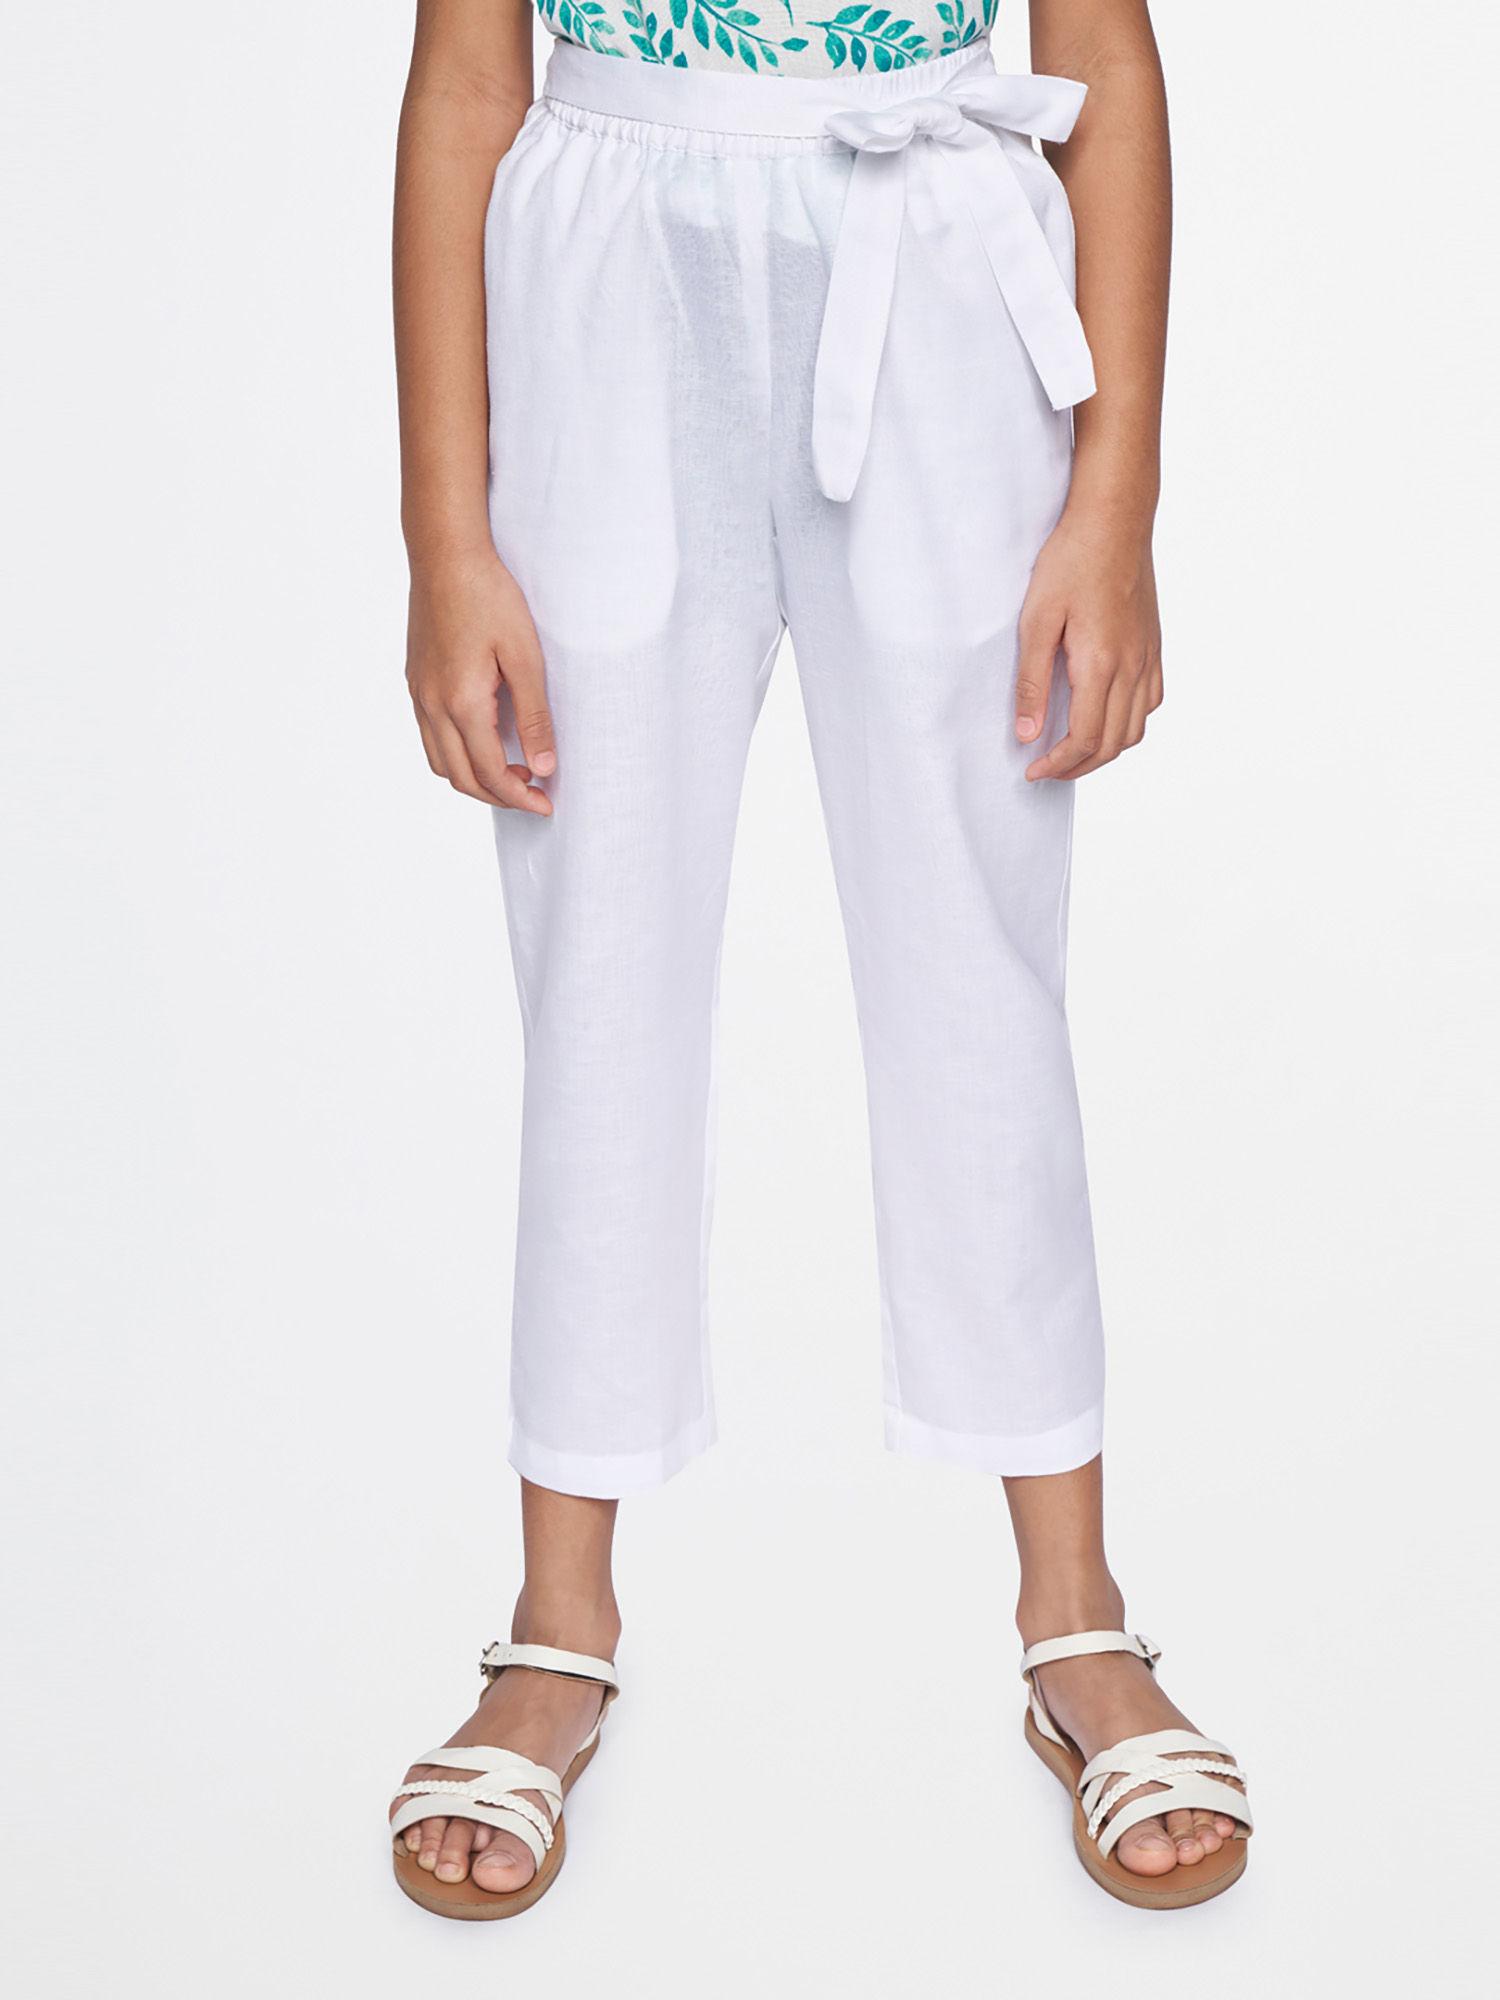 off white solid-plain ethnic bottoms